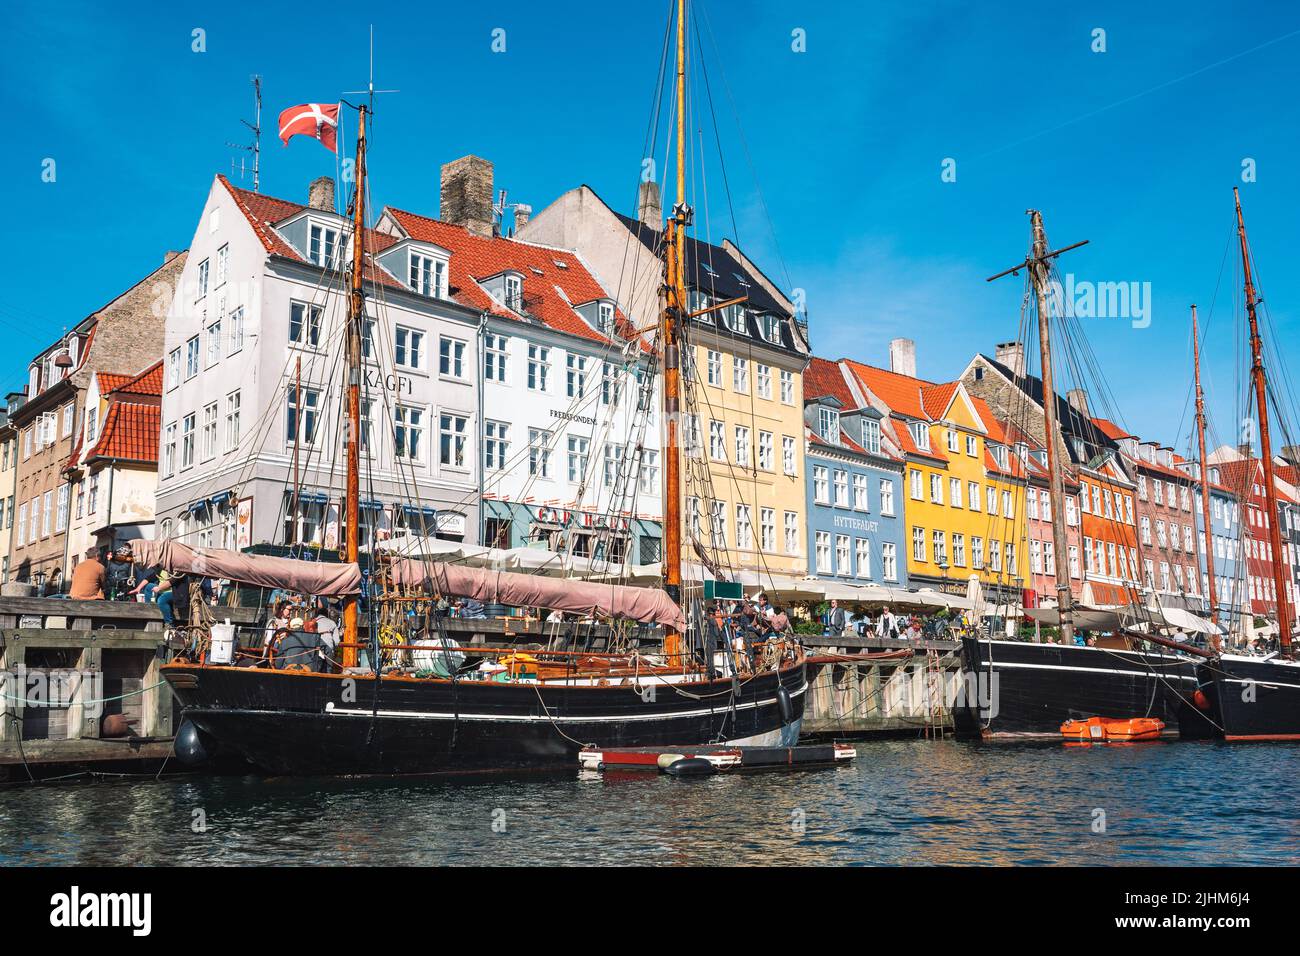 Beautiful view with colorful facade of traditional houses and old wooden ships, cruise boats along the Nyhavn Canal or New Harbour Stock Photo